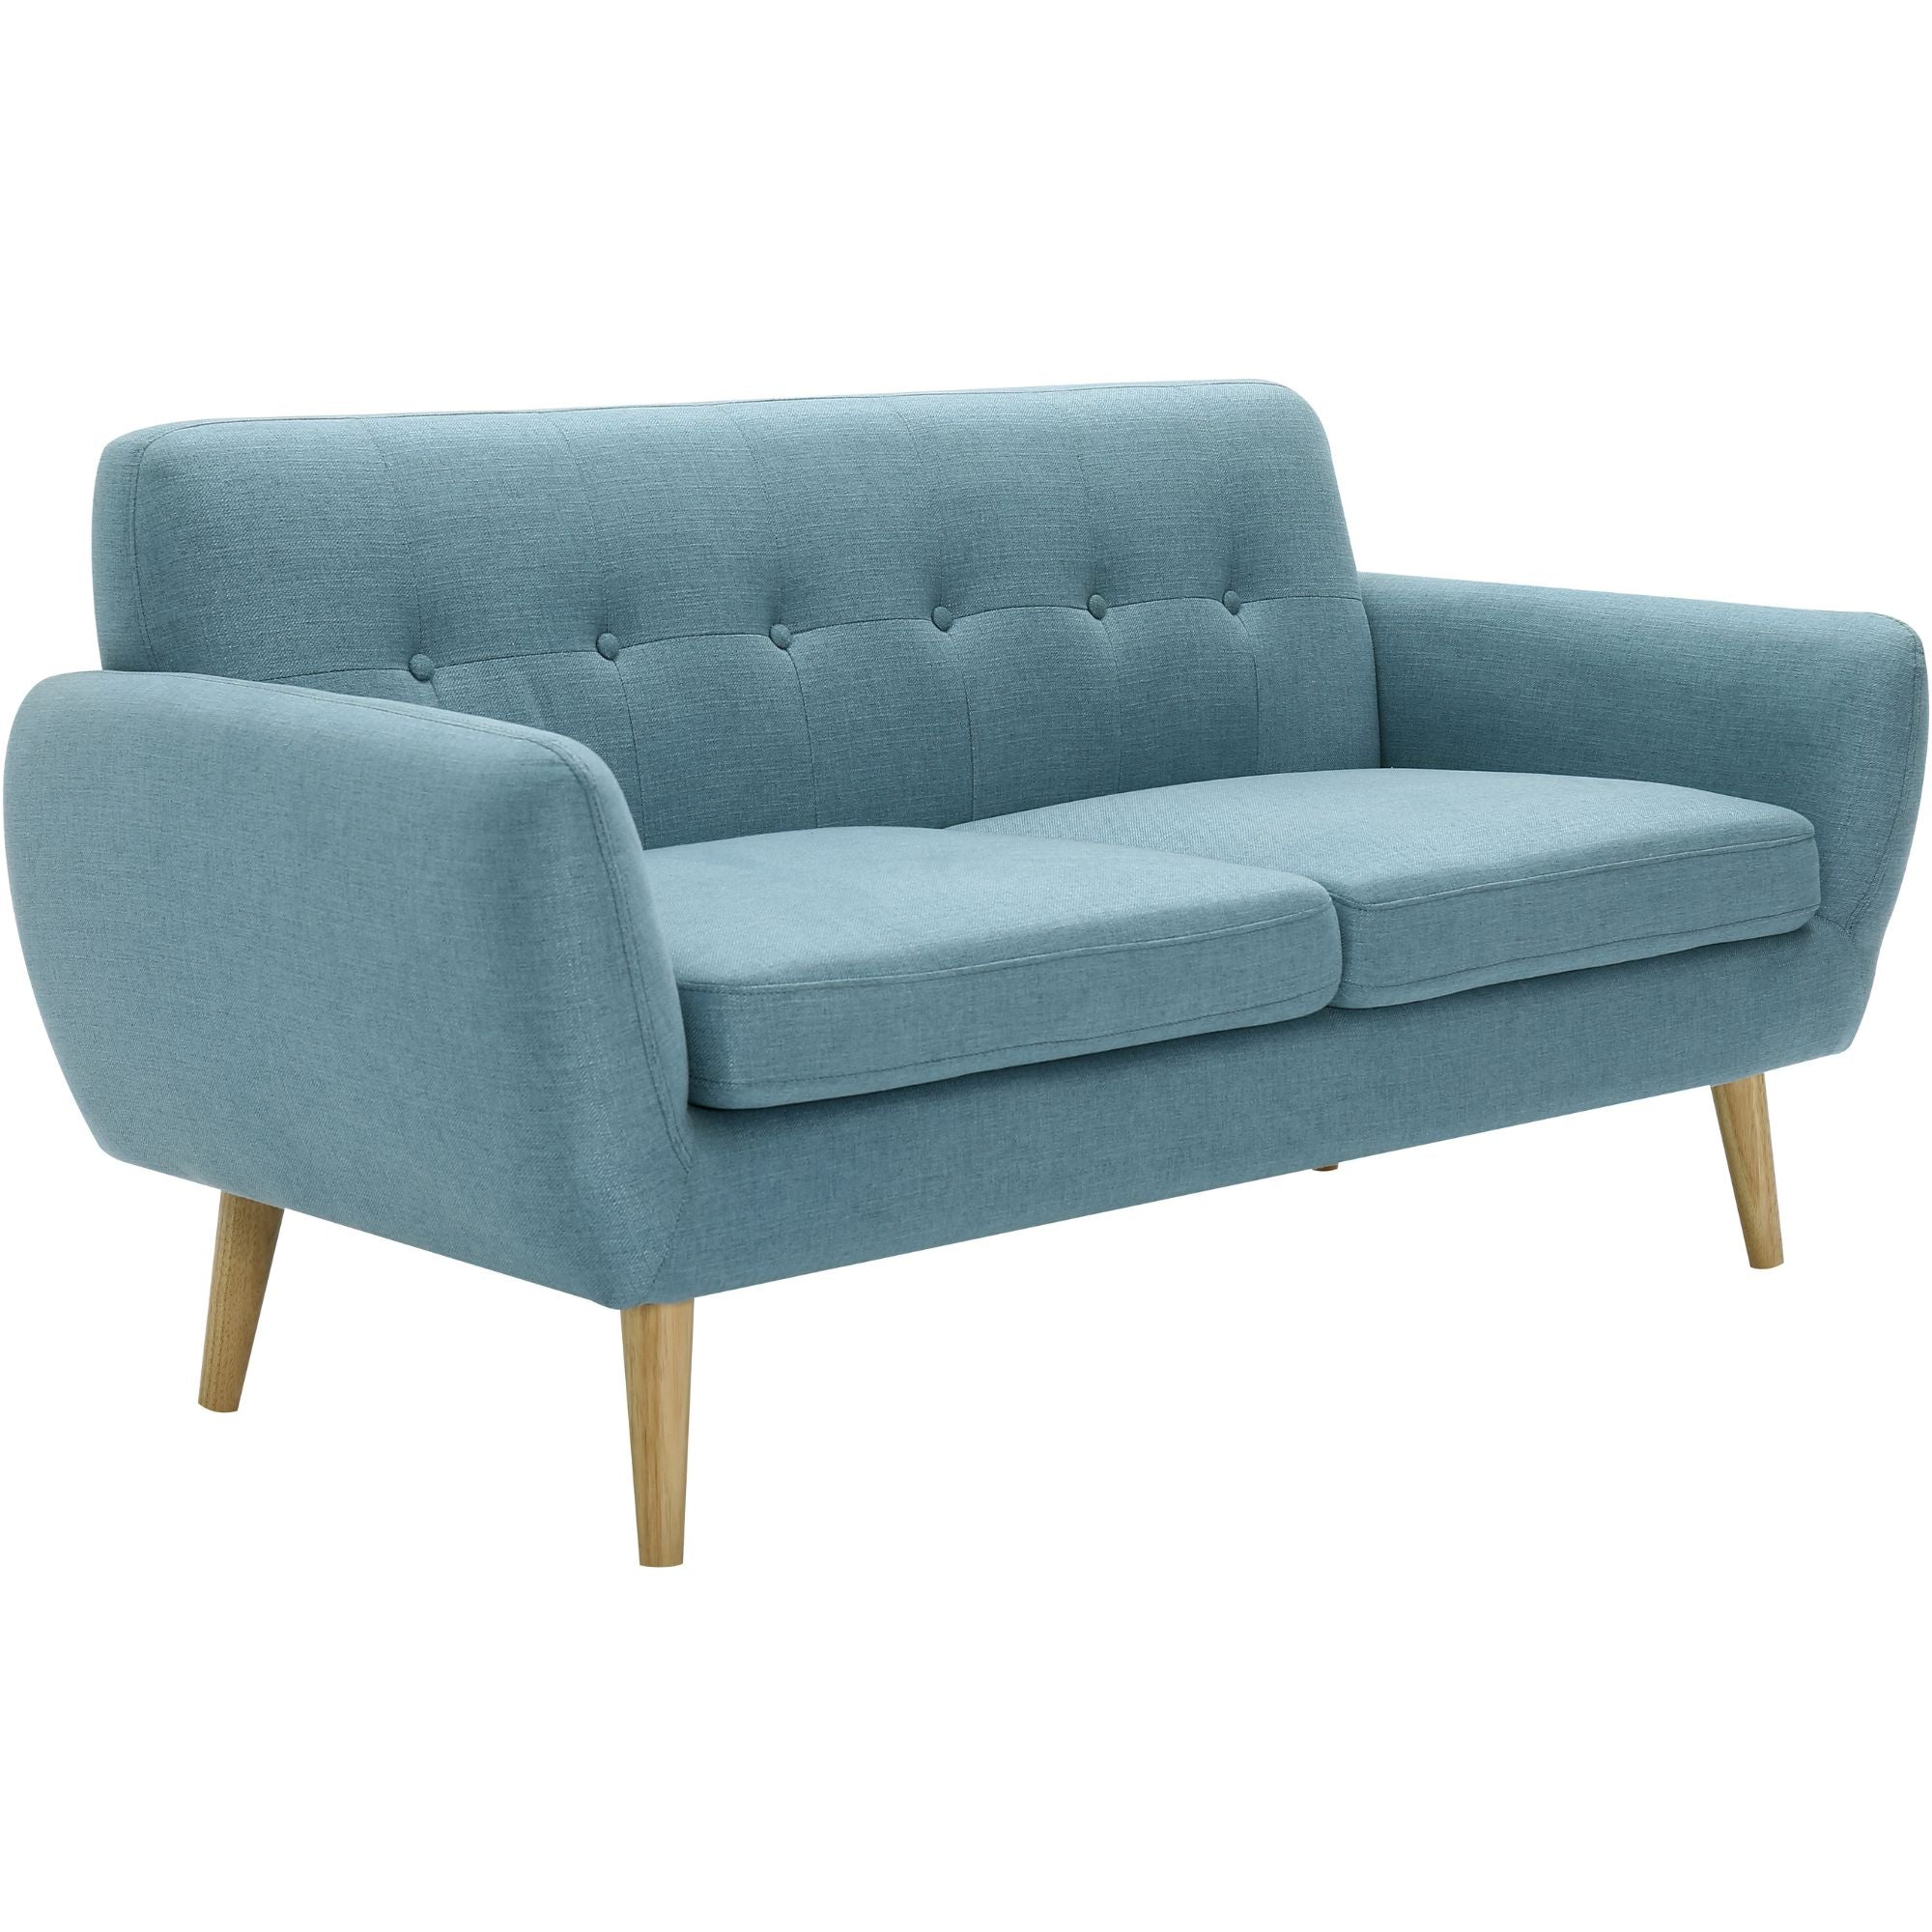 Dane 3 Seater Fabric Upholstered Sofa Lounge Couch - Blue